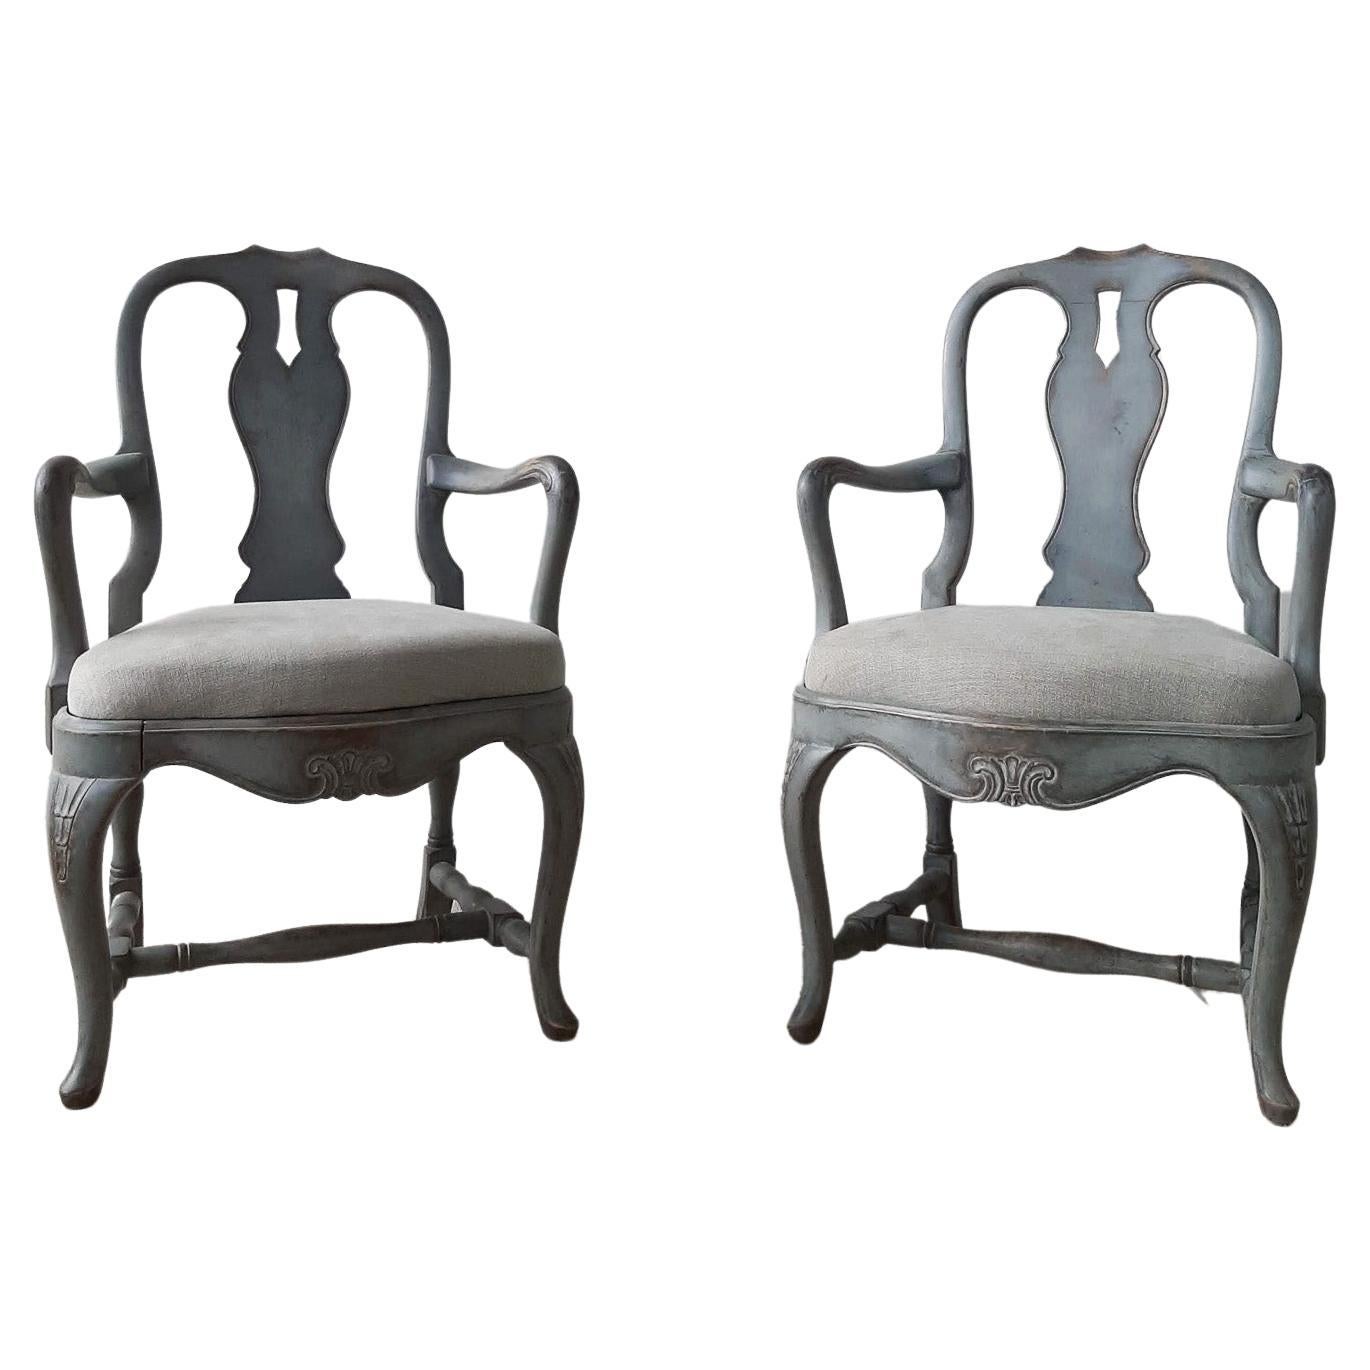 Pair of 19th Century Swedish Armchairs with Old Gray Patina